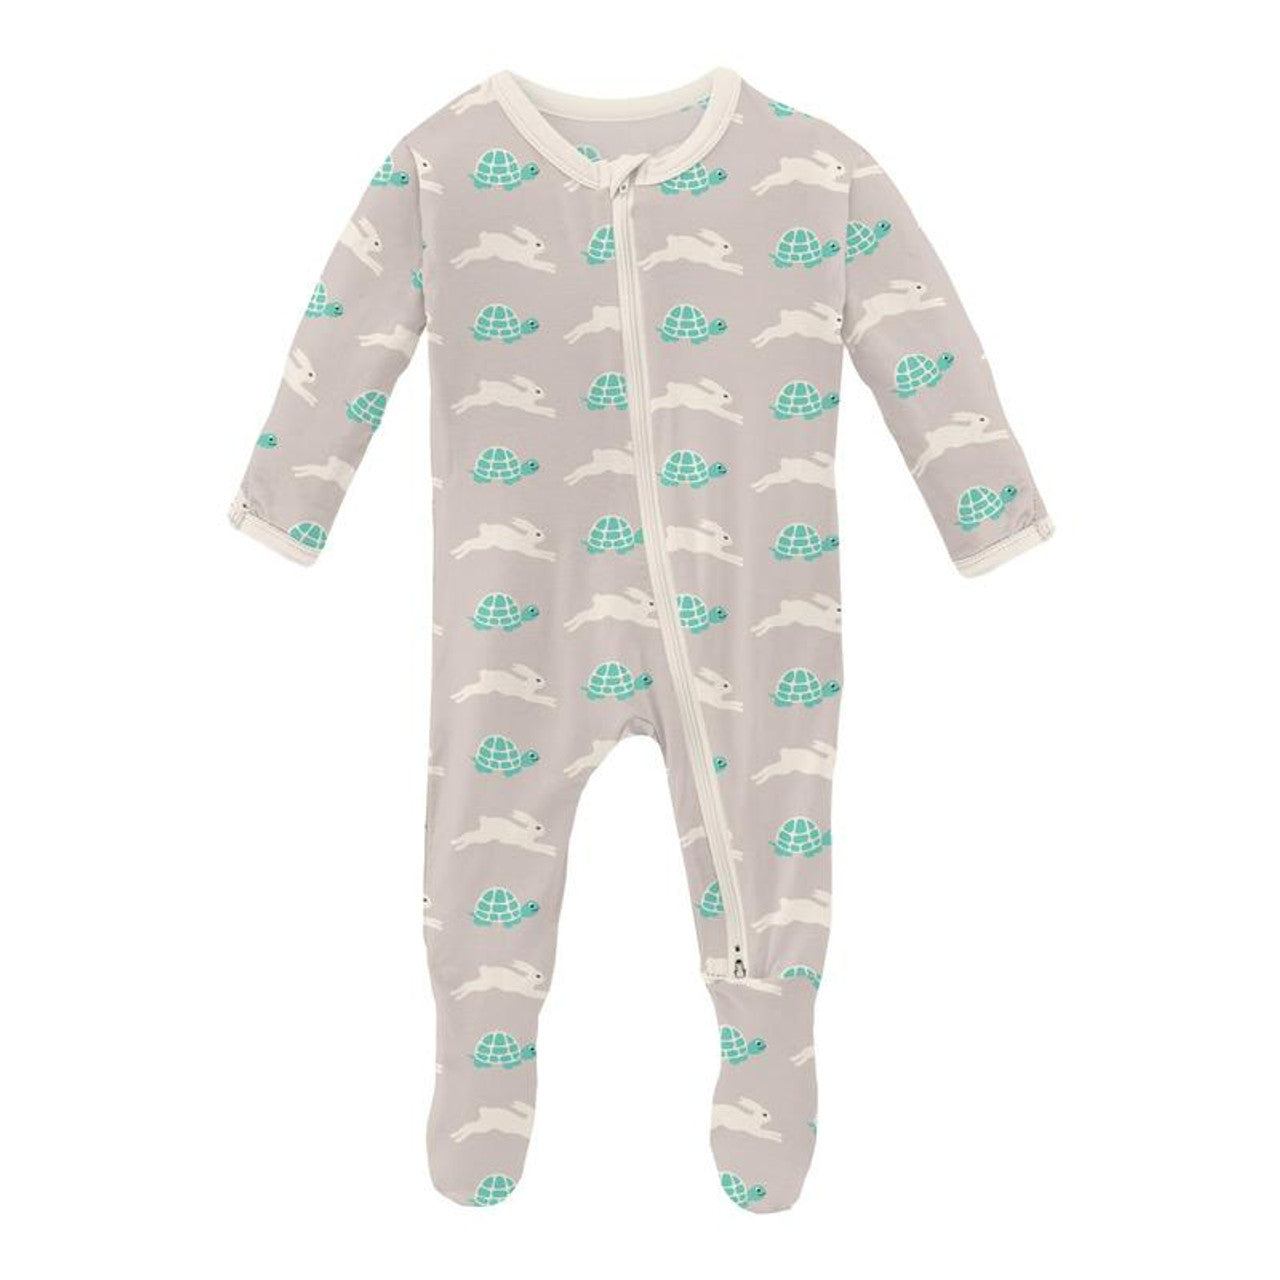 Latte Tortoise and Hare Print Footie with 2 Way Zipper